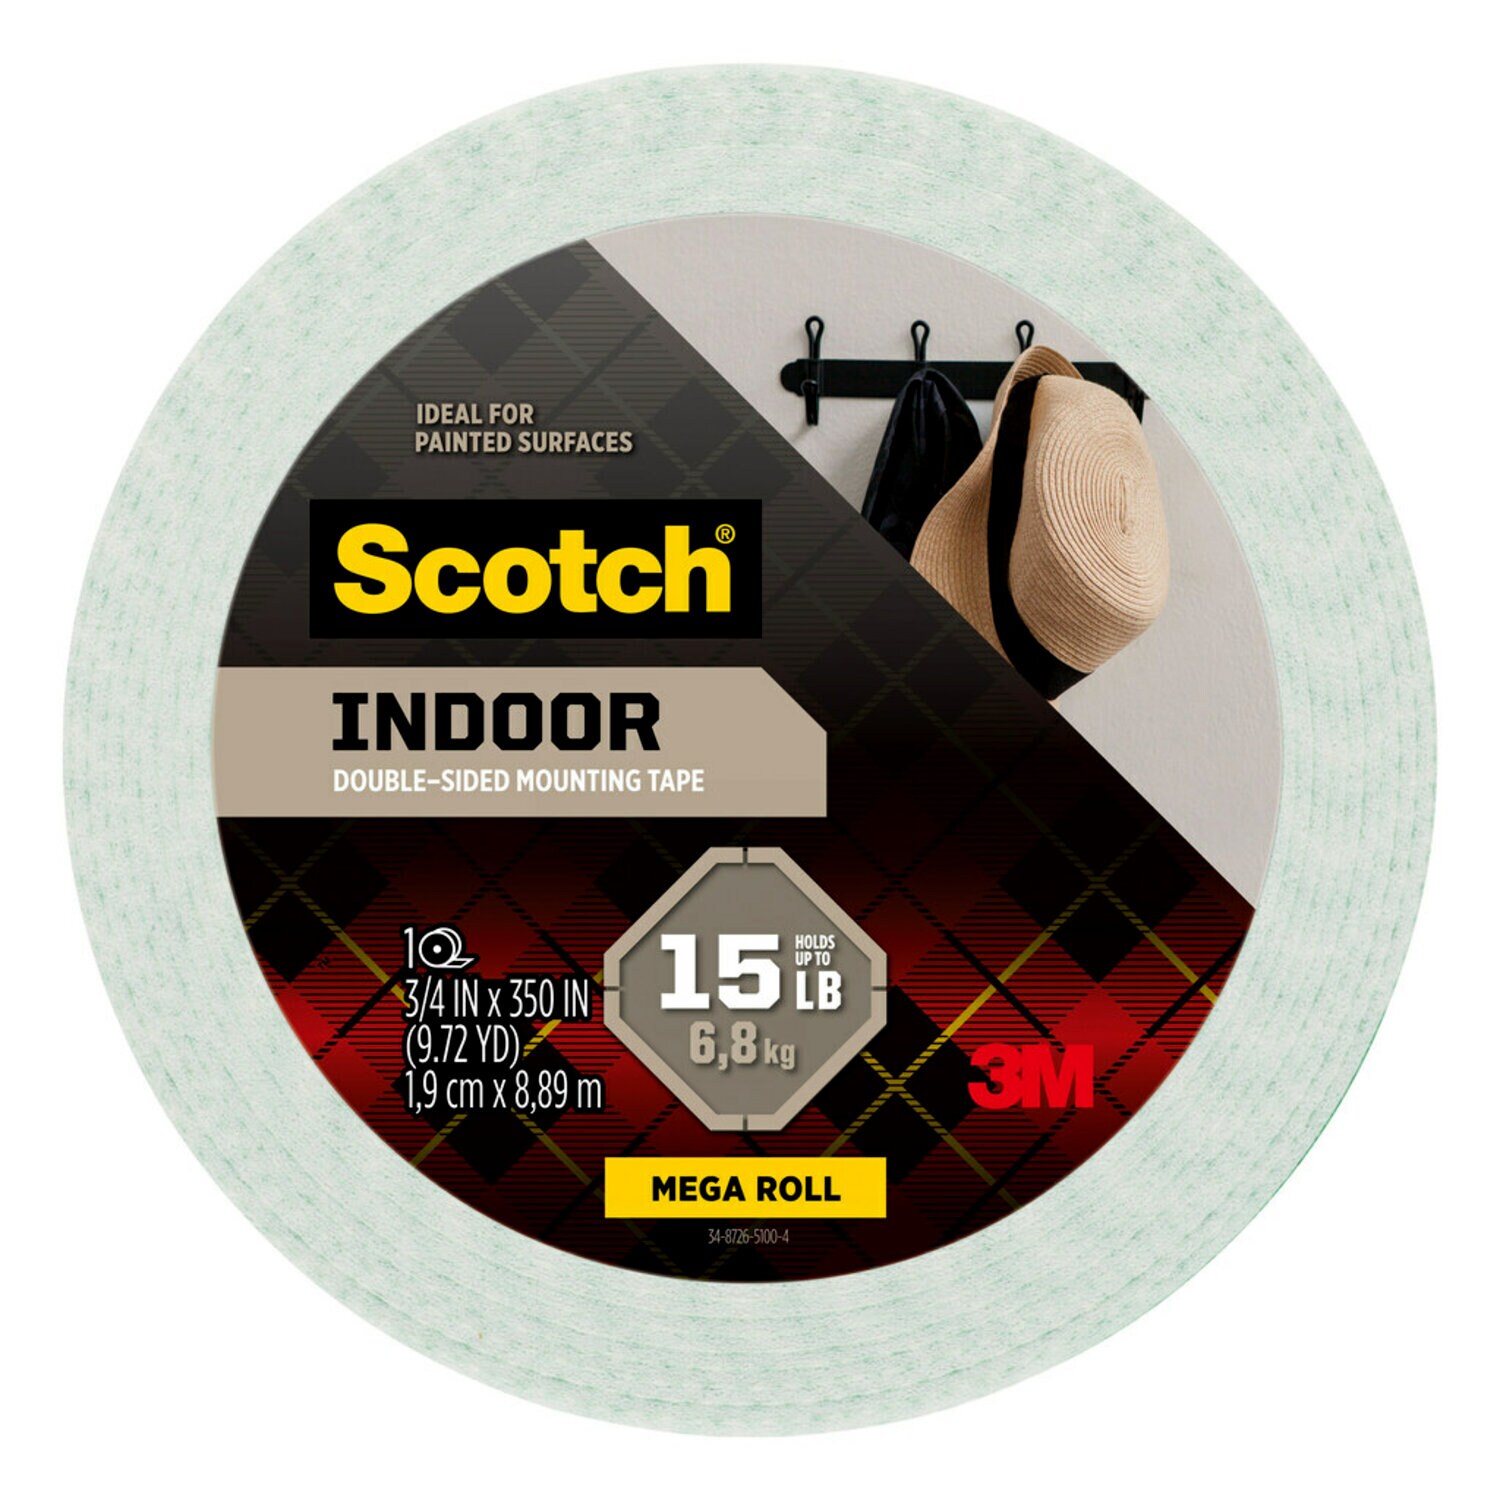 7100241747 - Scotch Indoor Double-Sided Mounting Tape 110S-LONG, 0.75 in x 350 in (1.9 cm x 8.89 m)